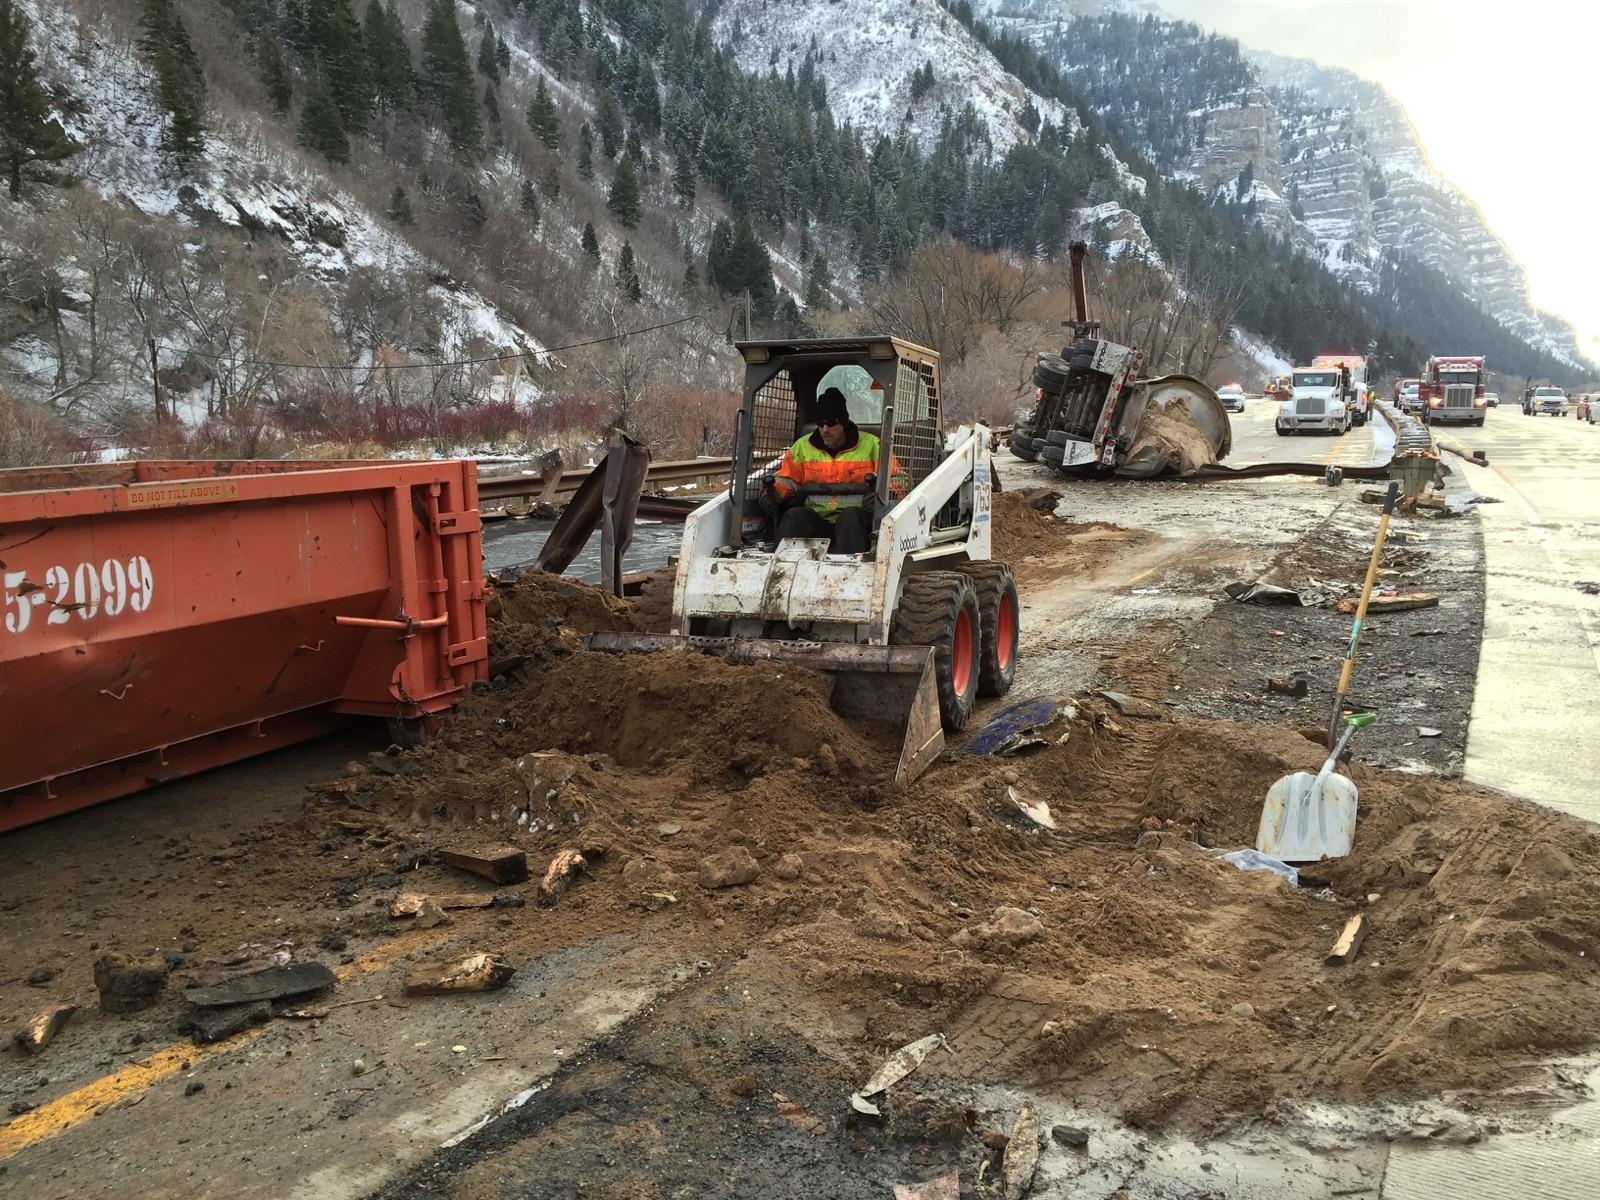 Cleanup efforts for the crude oil spill on Highway 189 in Provo Canyon. 